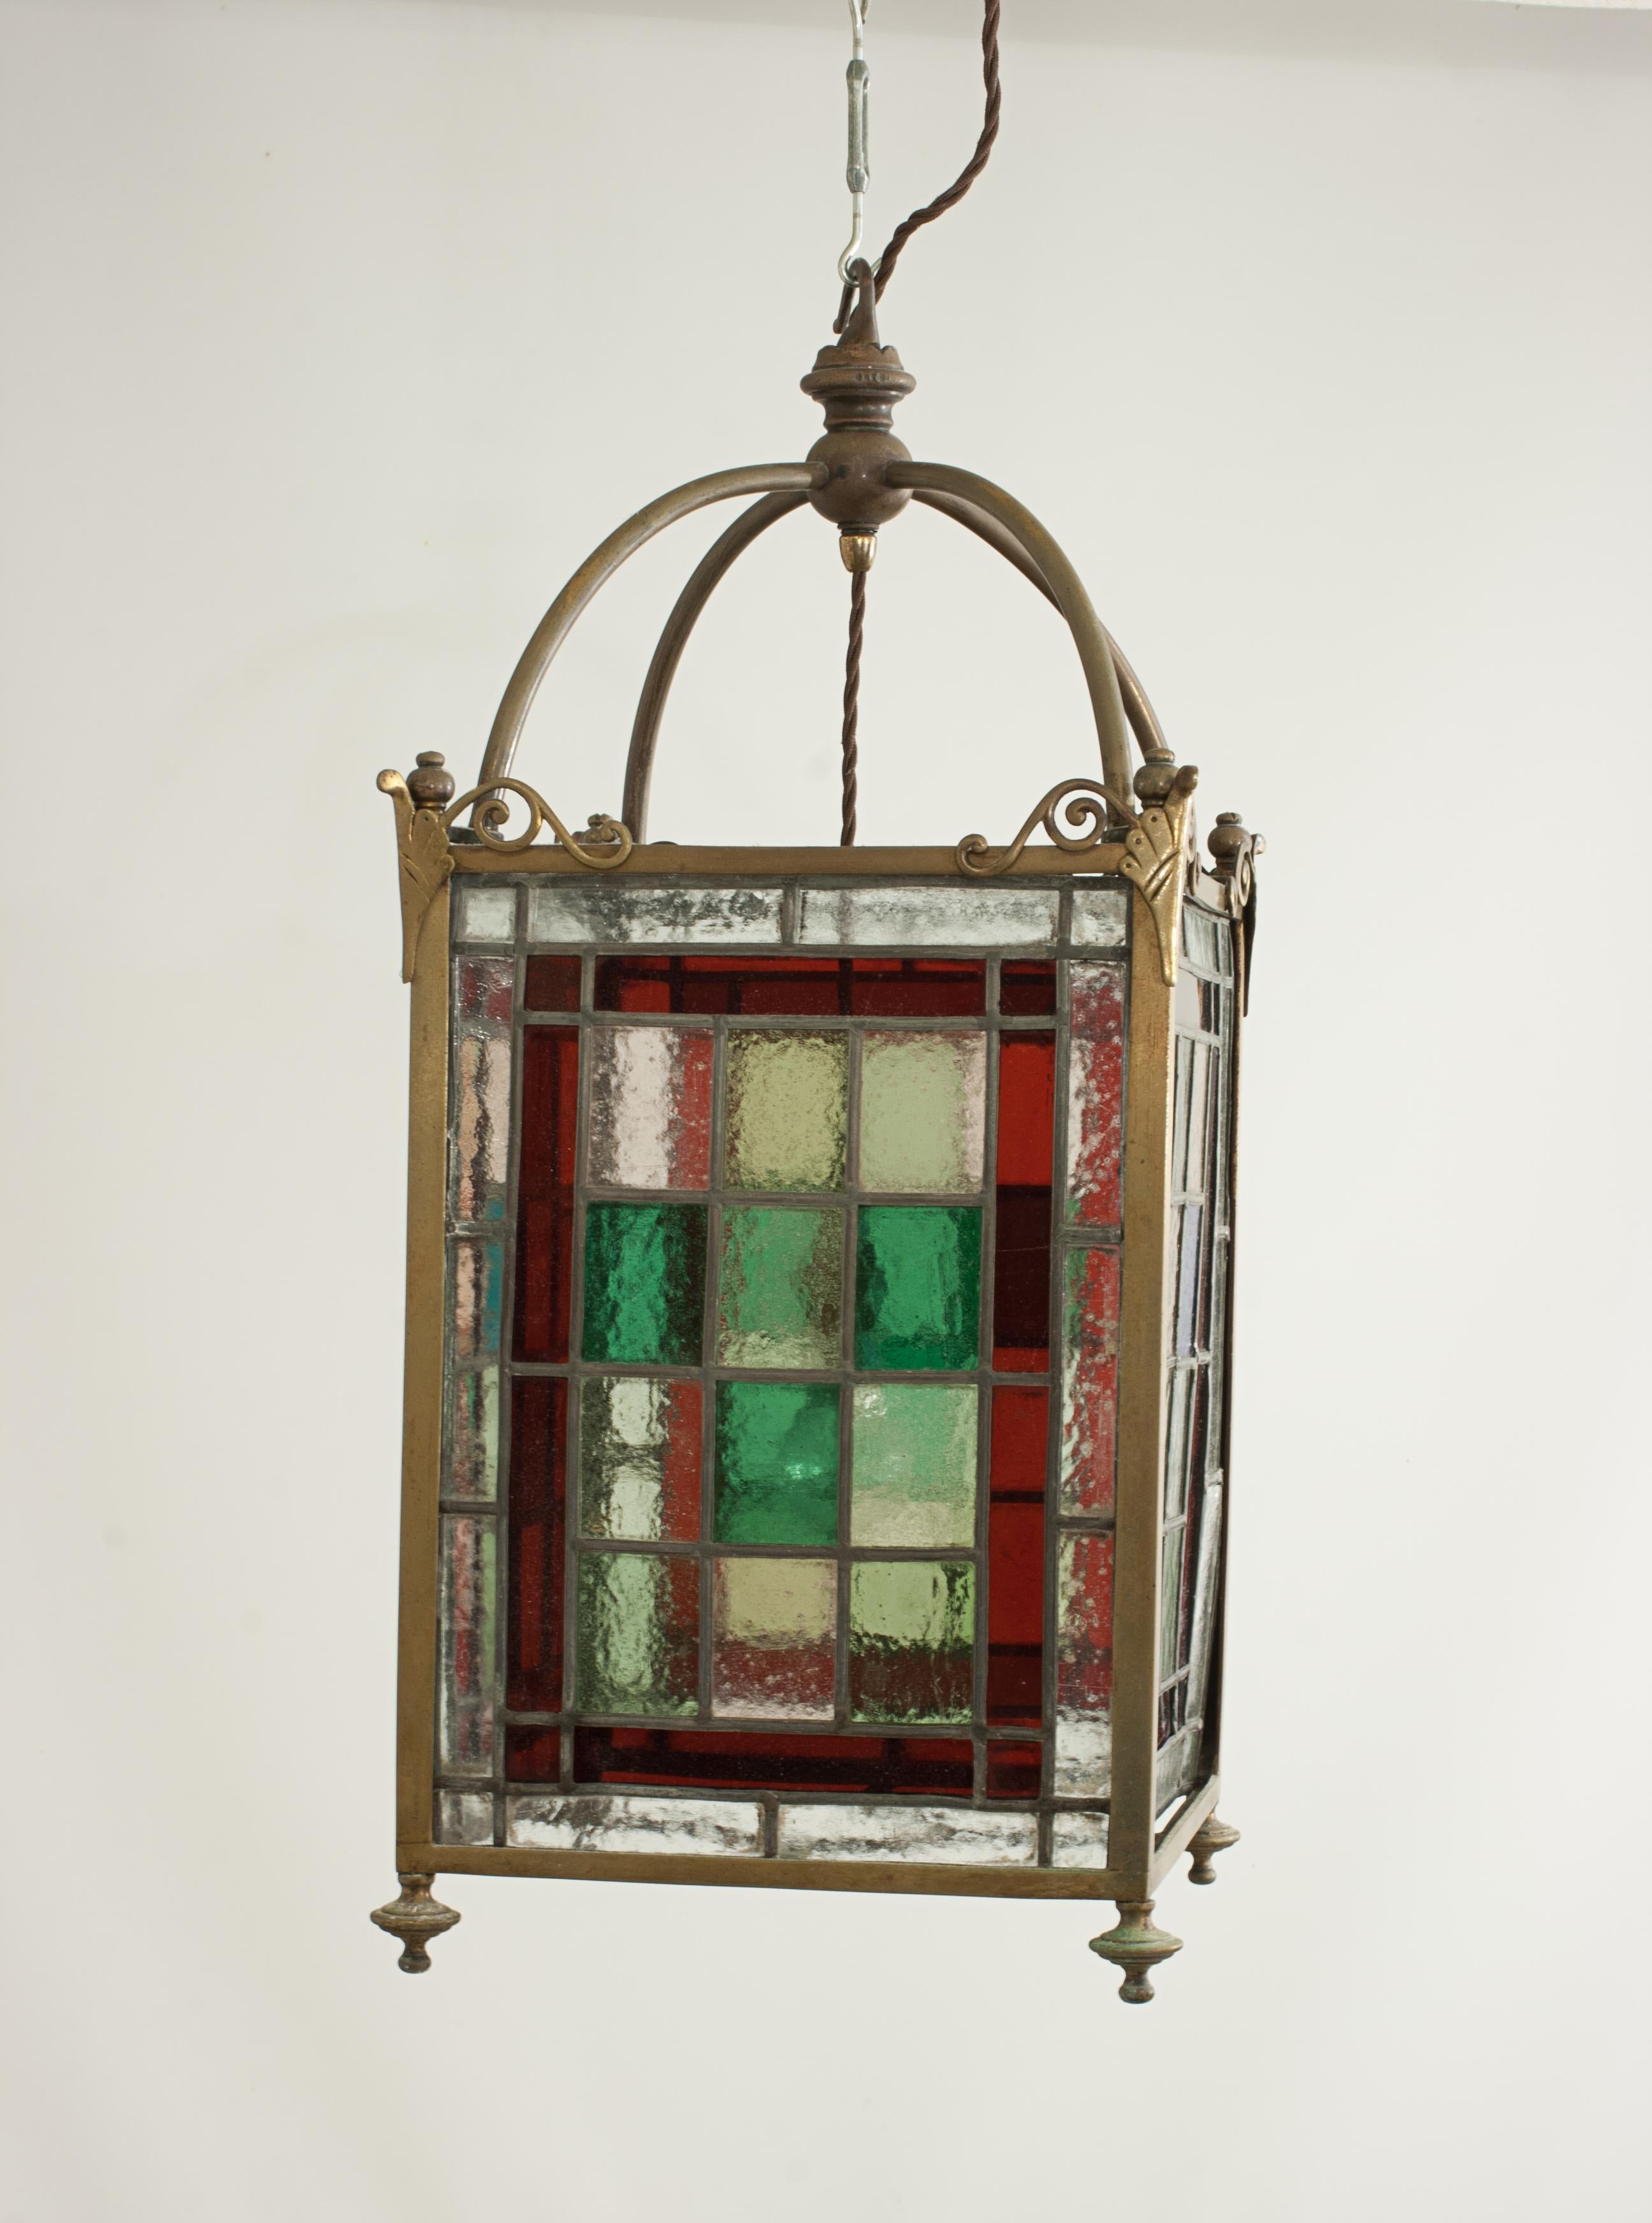 Brass Victorian Stain Glass Ceiling Pendant Lantern For Sale